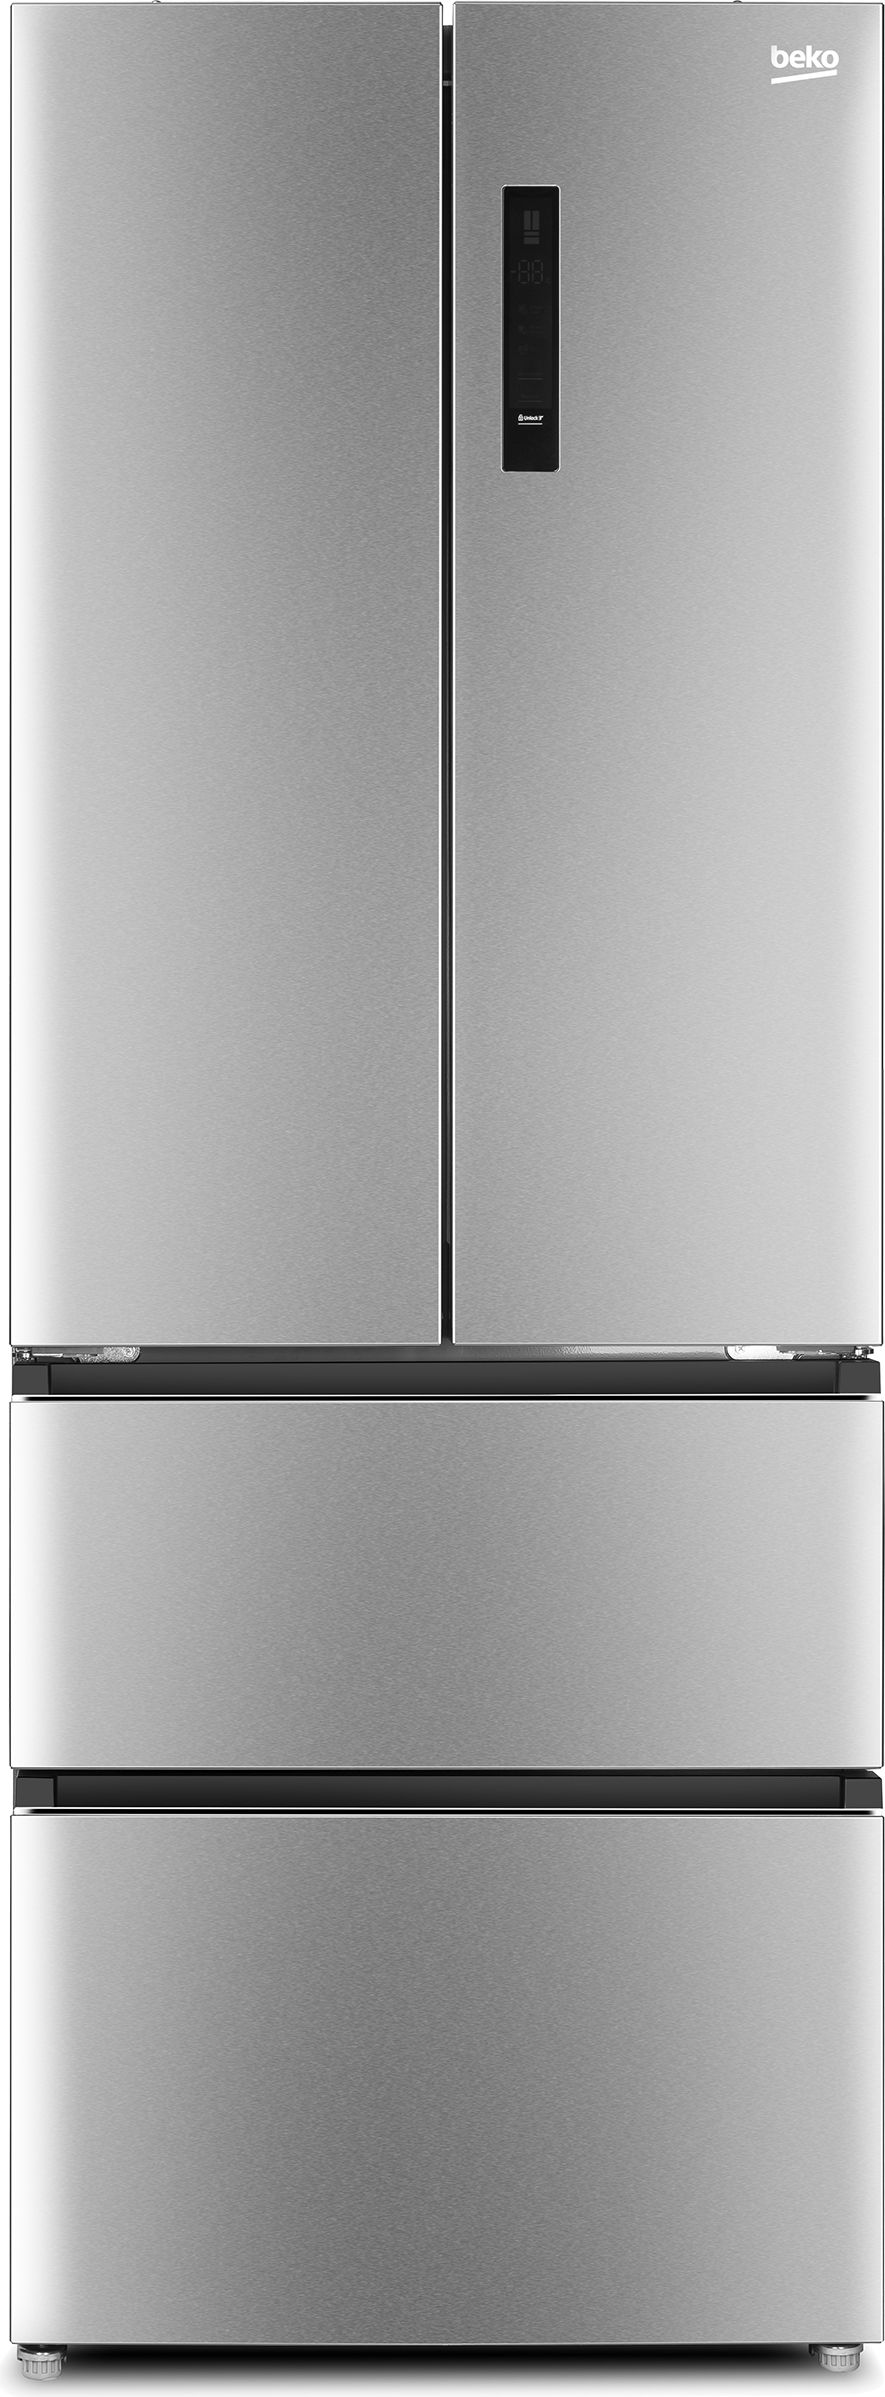 Beko GN14790PX Frost Free American Fridge Freezer - Brushed Steel - E Rated, Stainless Steel